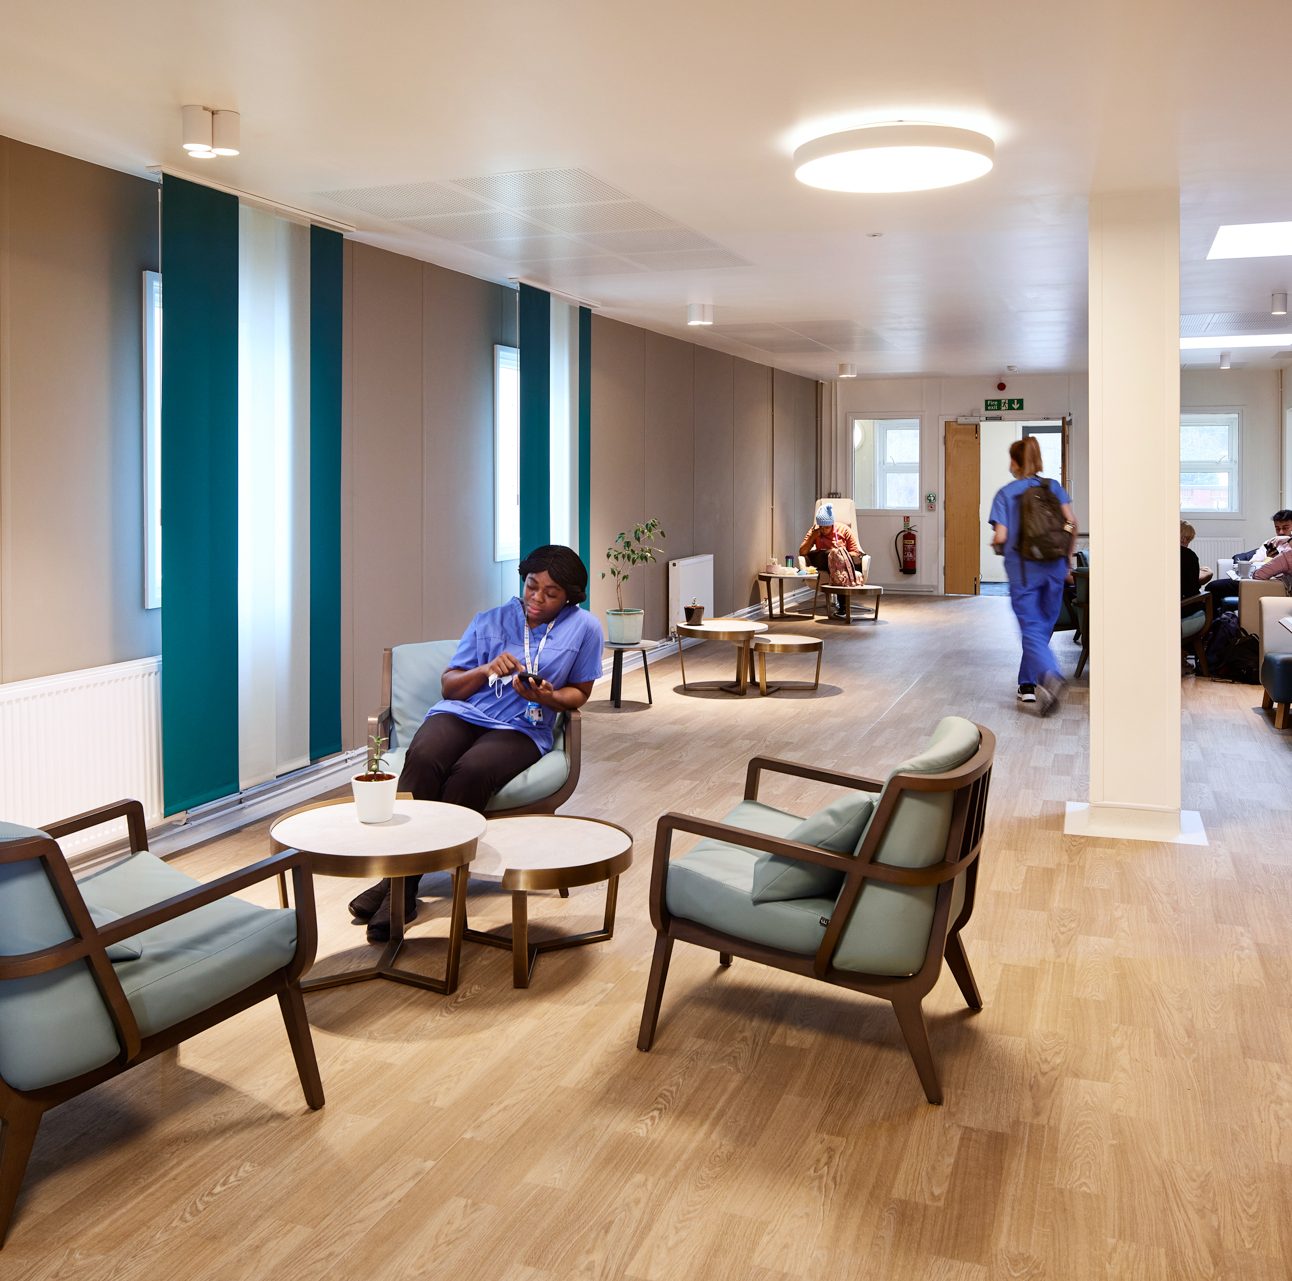 The Wellbeing Hub at Whipps Cross Hospital